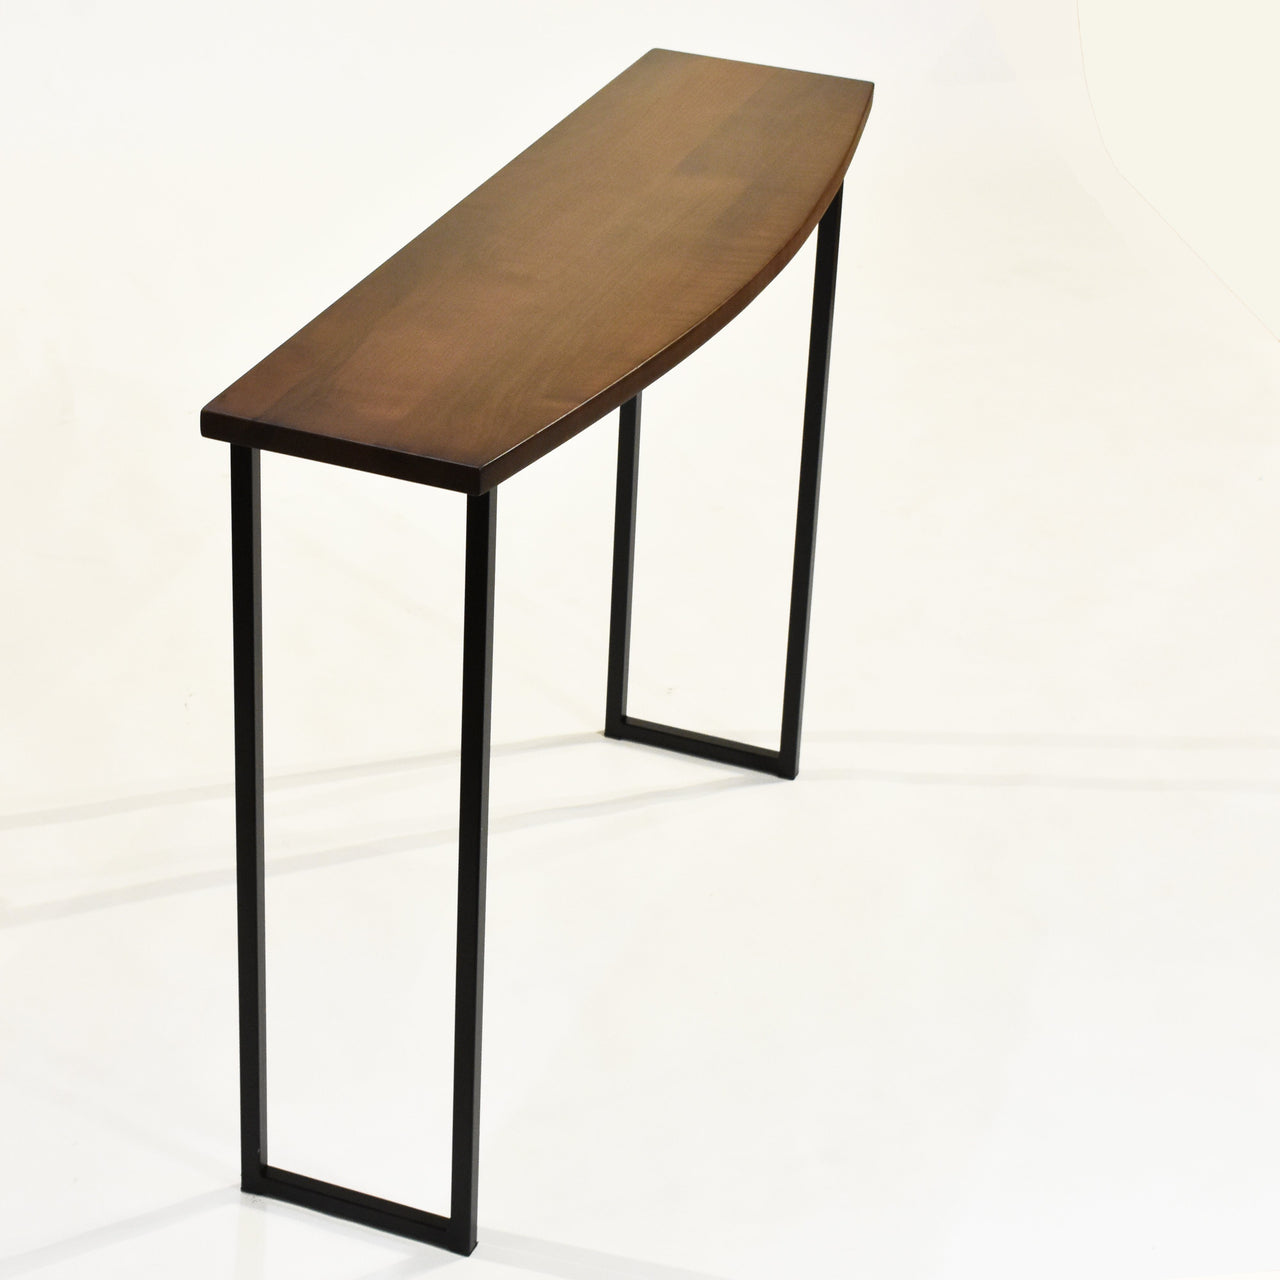 Grace Console Table Console Table Gingko 